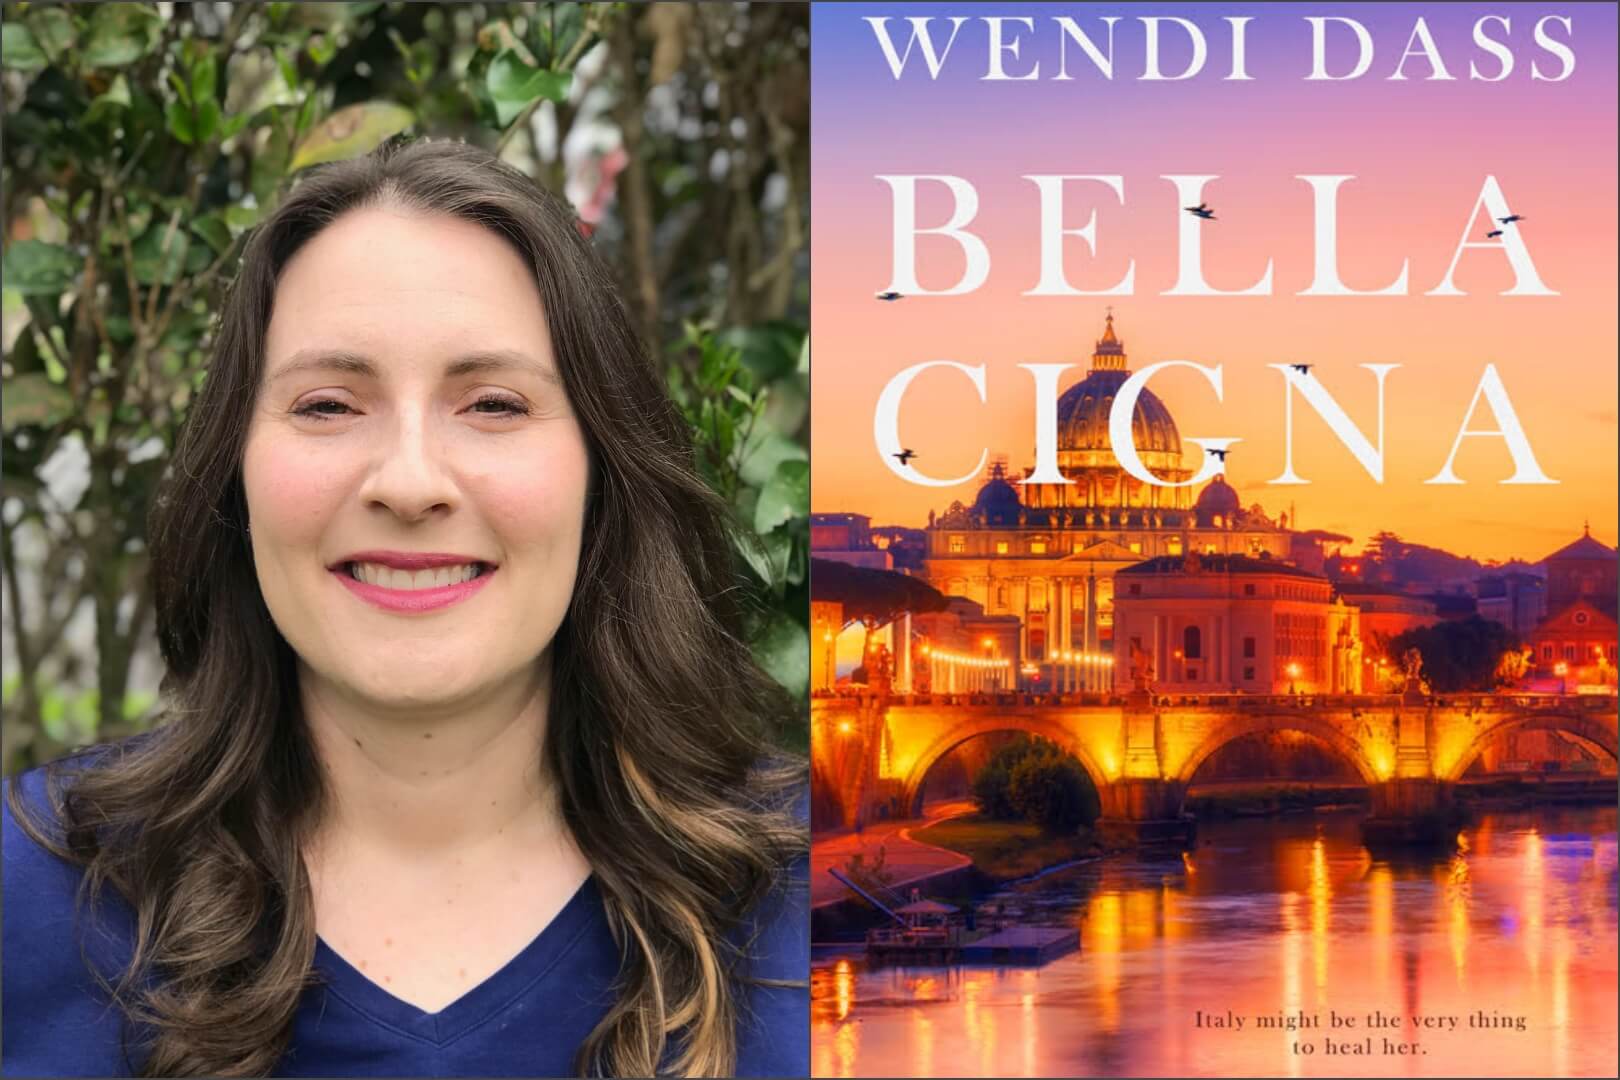 Q&A with Wendi Dass, Author of Bella Cigna